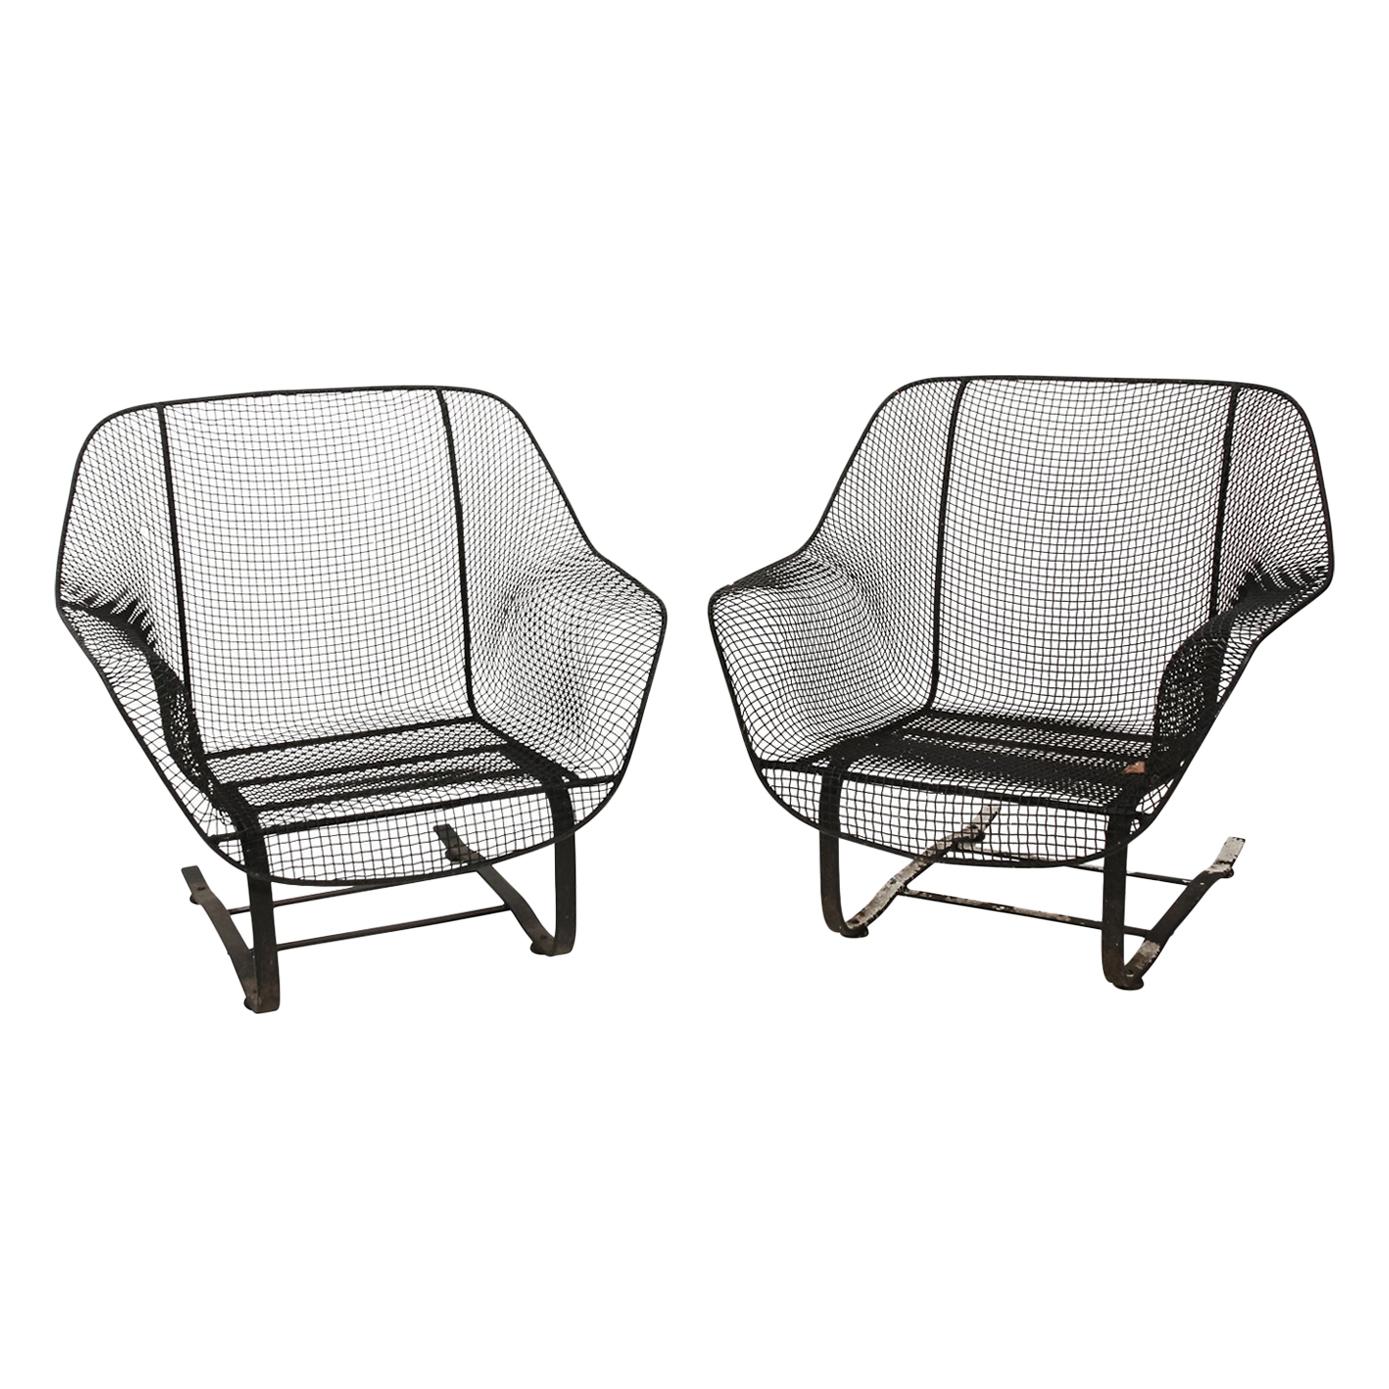 Pair of Wrought Iron Mesh Bouncer Chairs by Russel Woodard